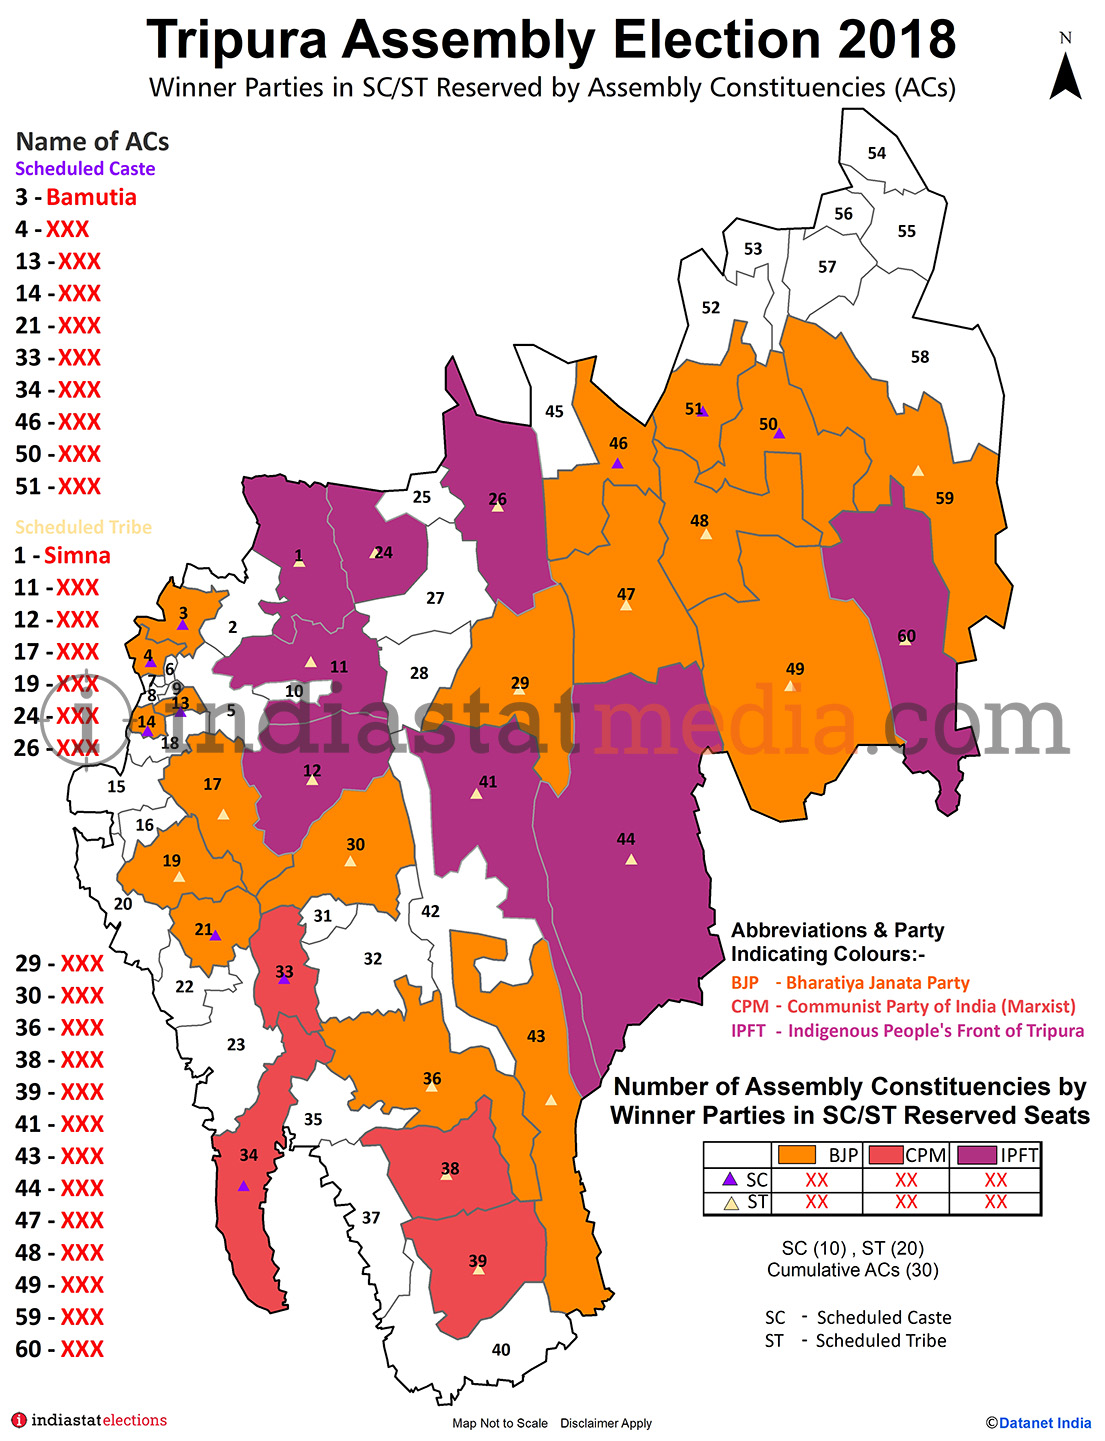 Winner Parties in Scheduled Caste (SC) / Scheduled Tribe (ST) Reserved Constituencies in Tripura (Assembly Election - 2018)